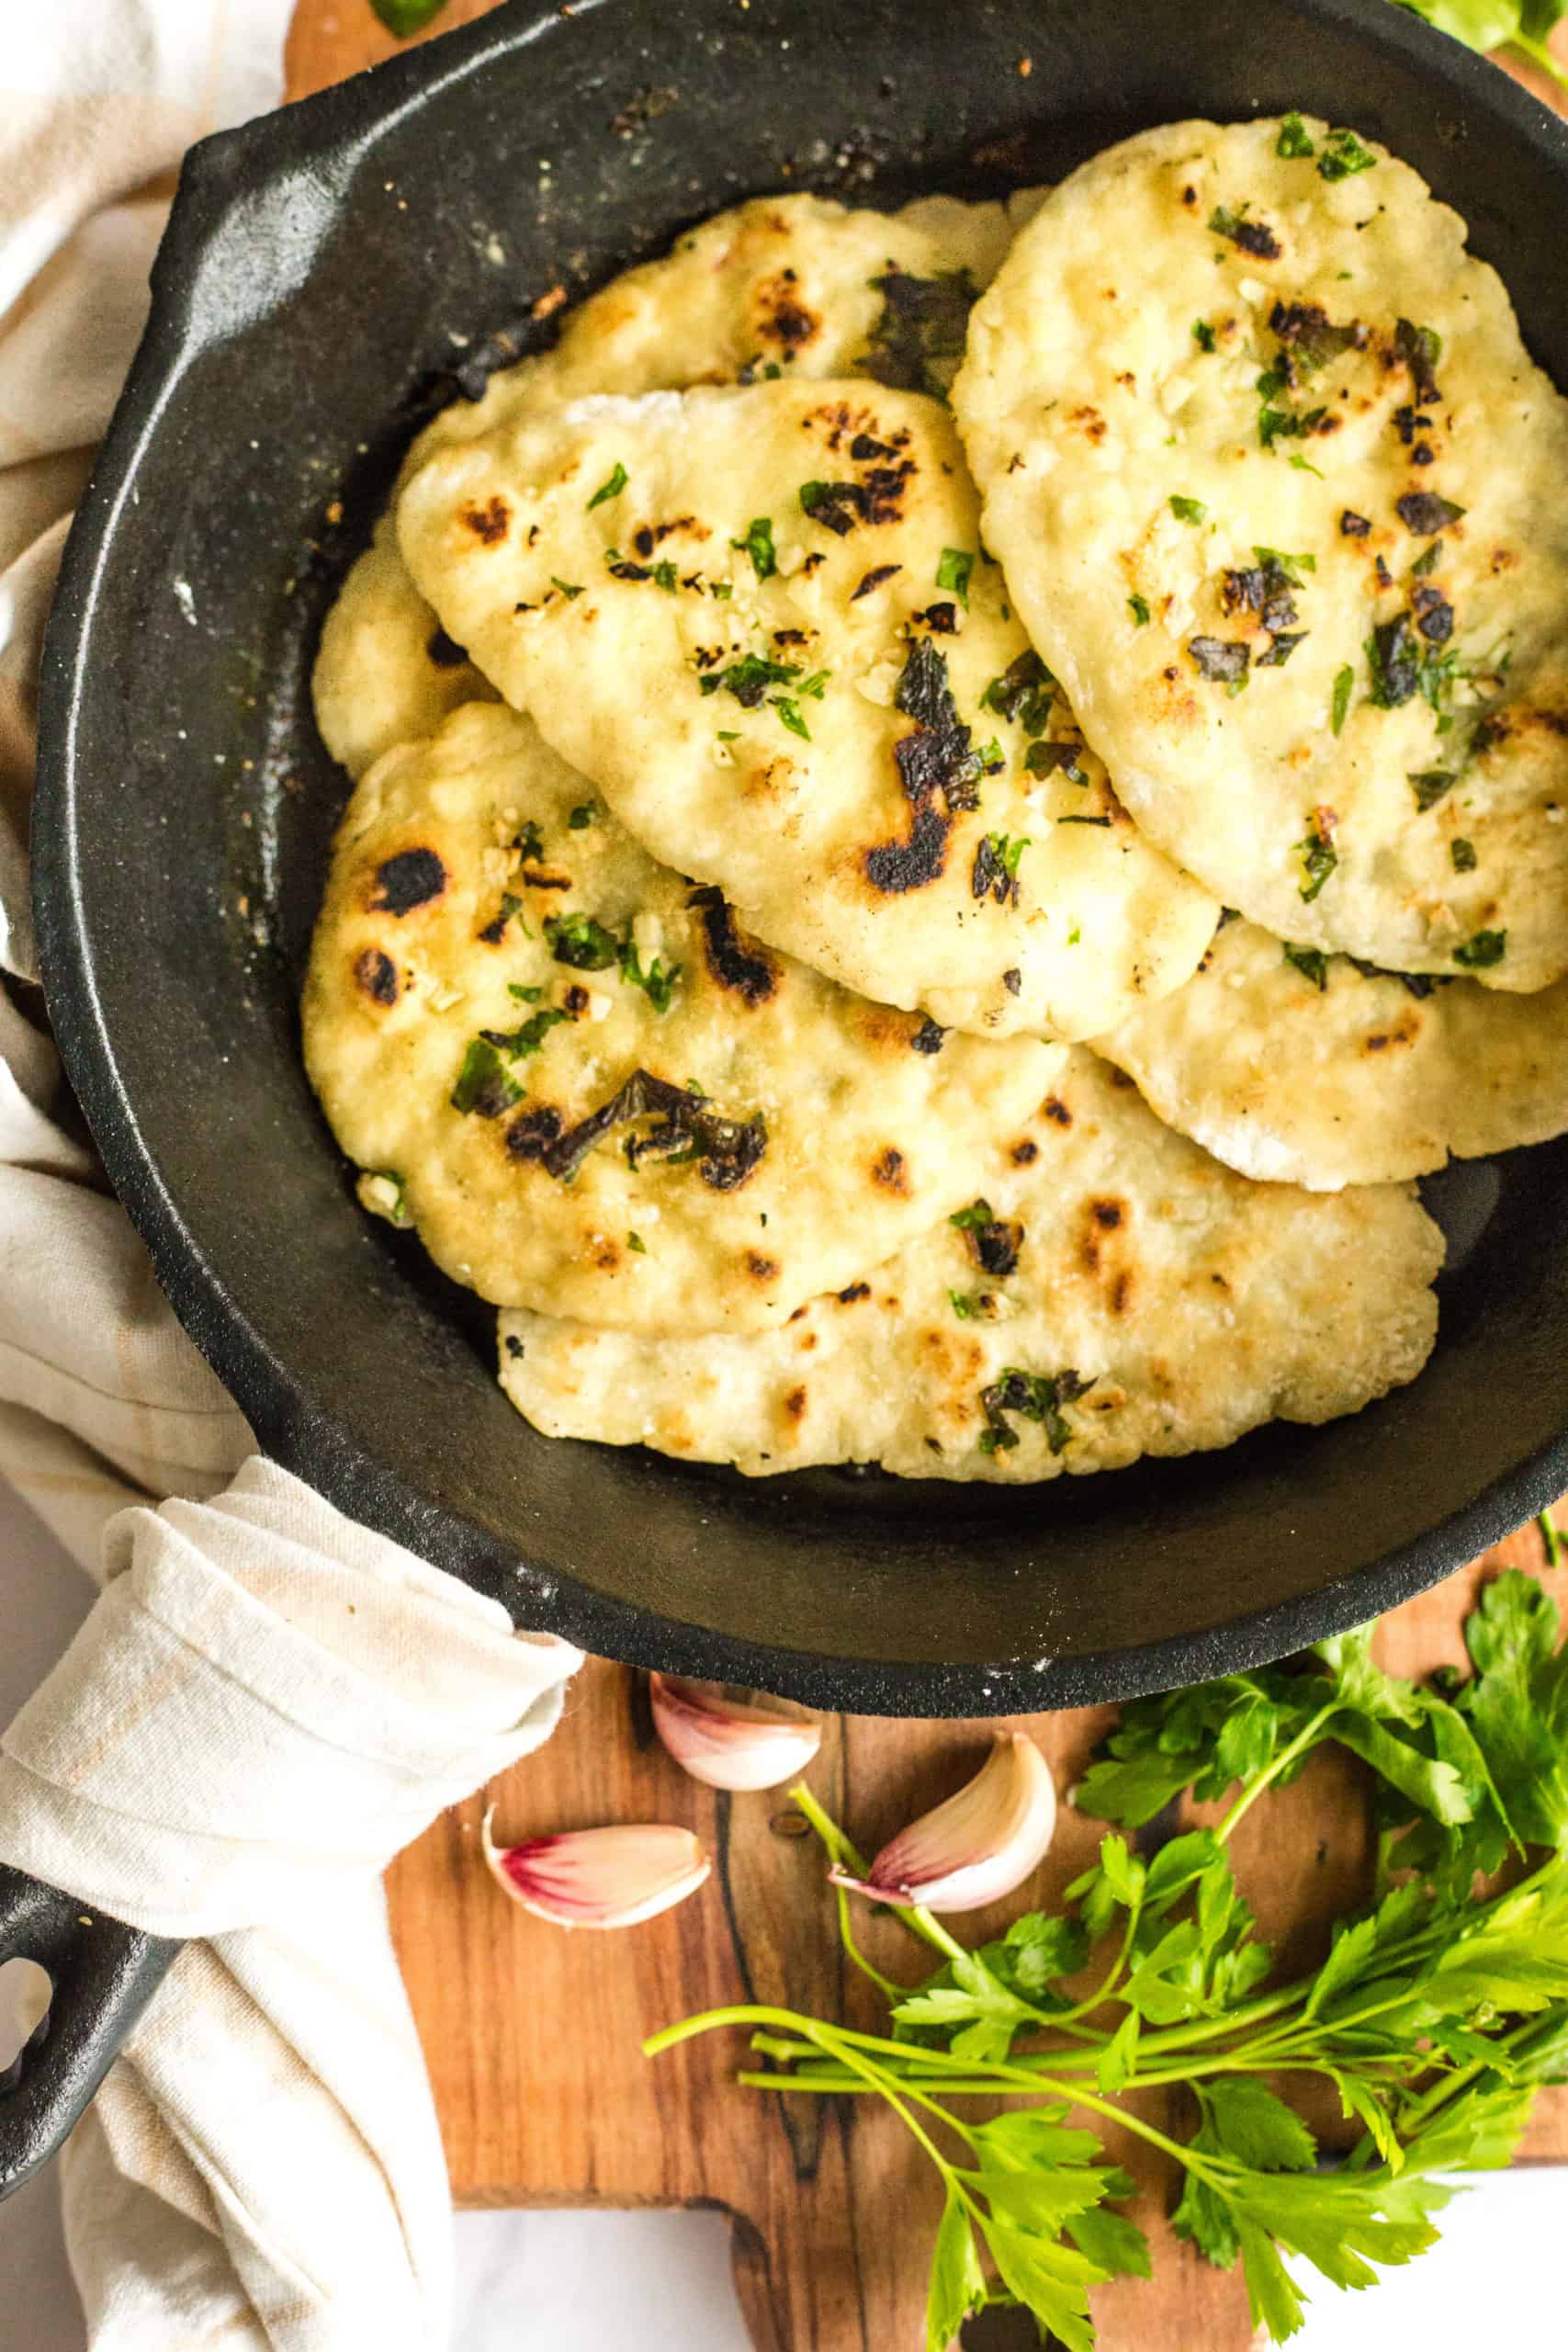 Gluten-free naan in a cast iron skillet on a wooden board